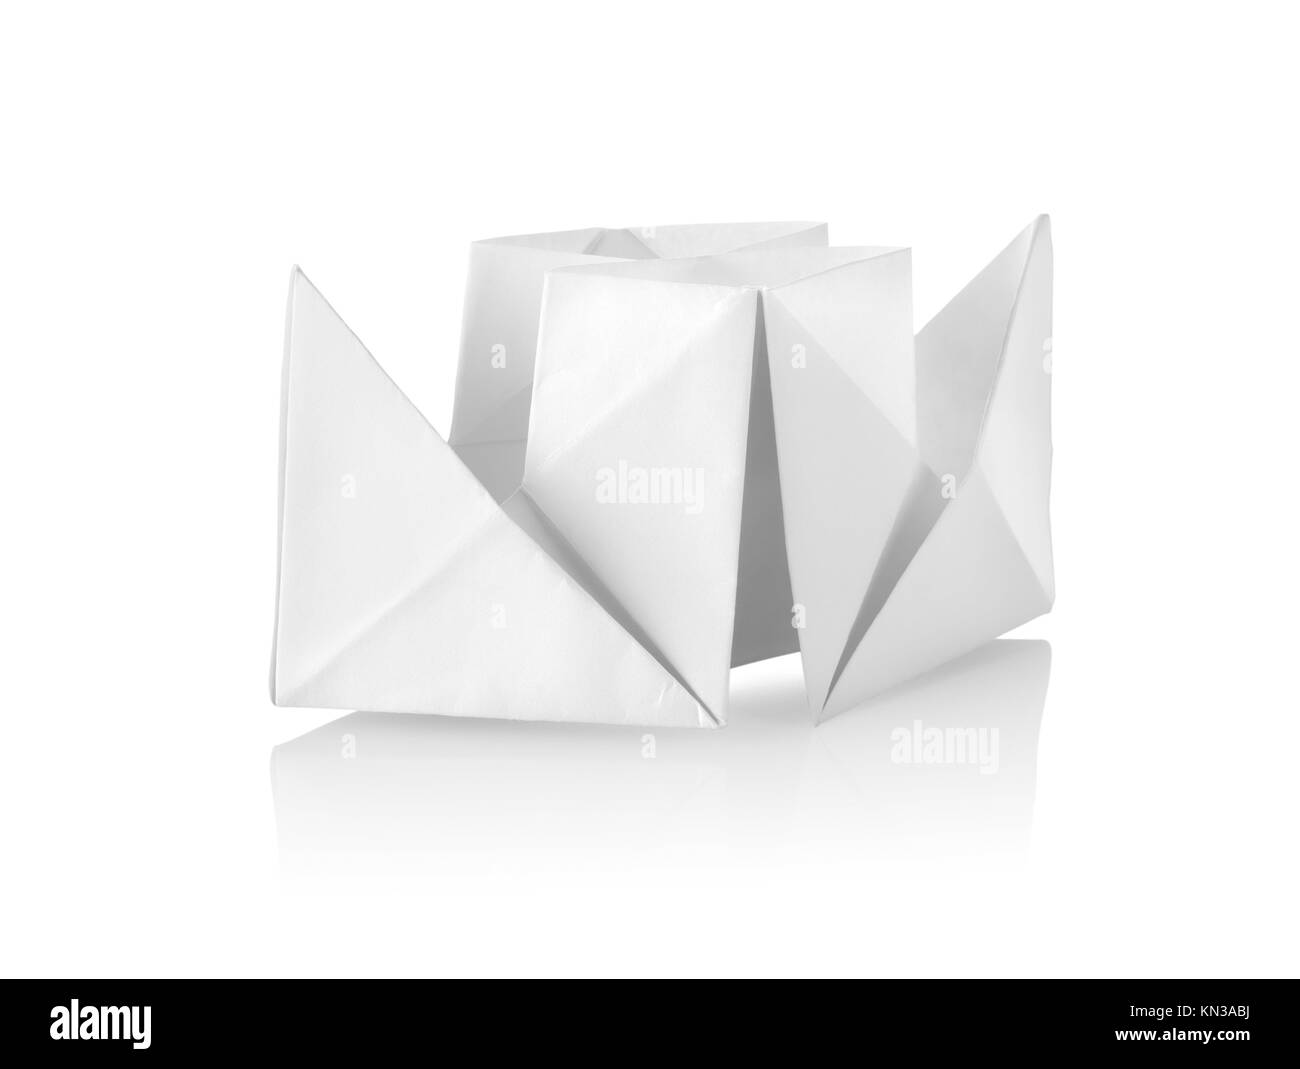 Paper boat isolated on a white background. Stock Photo